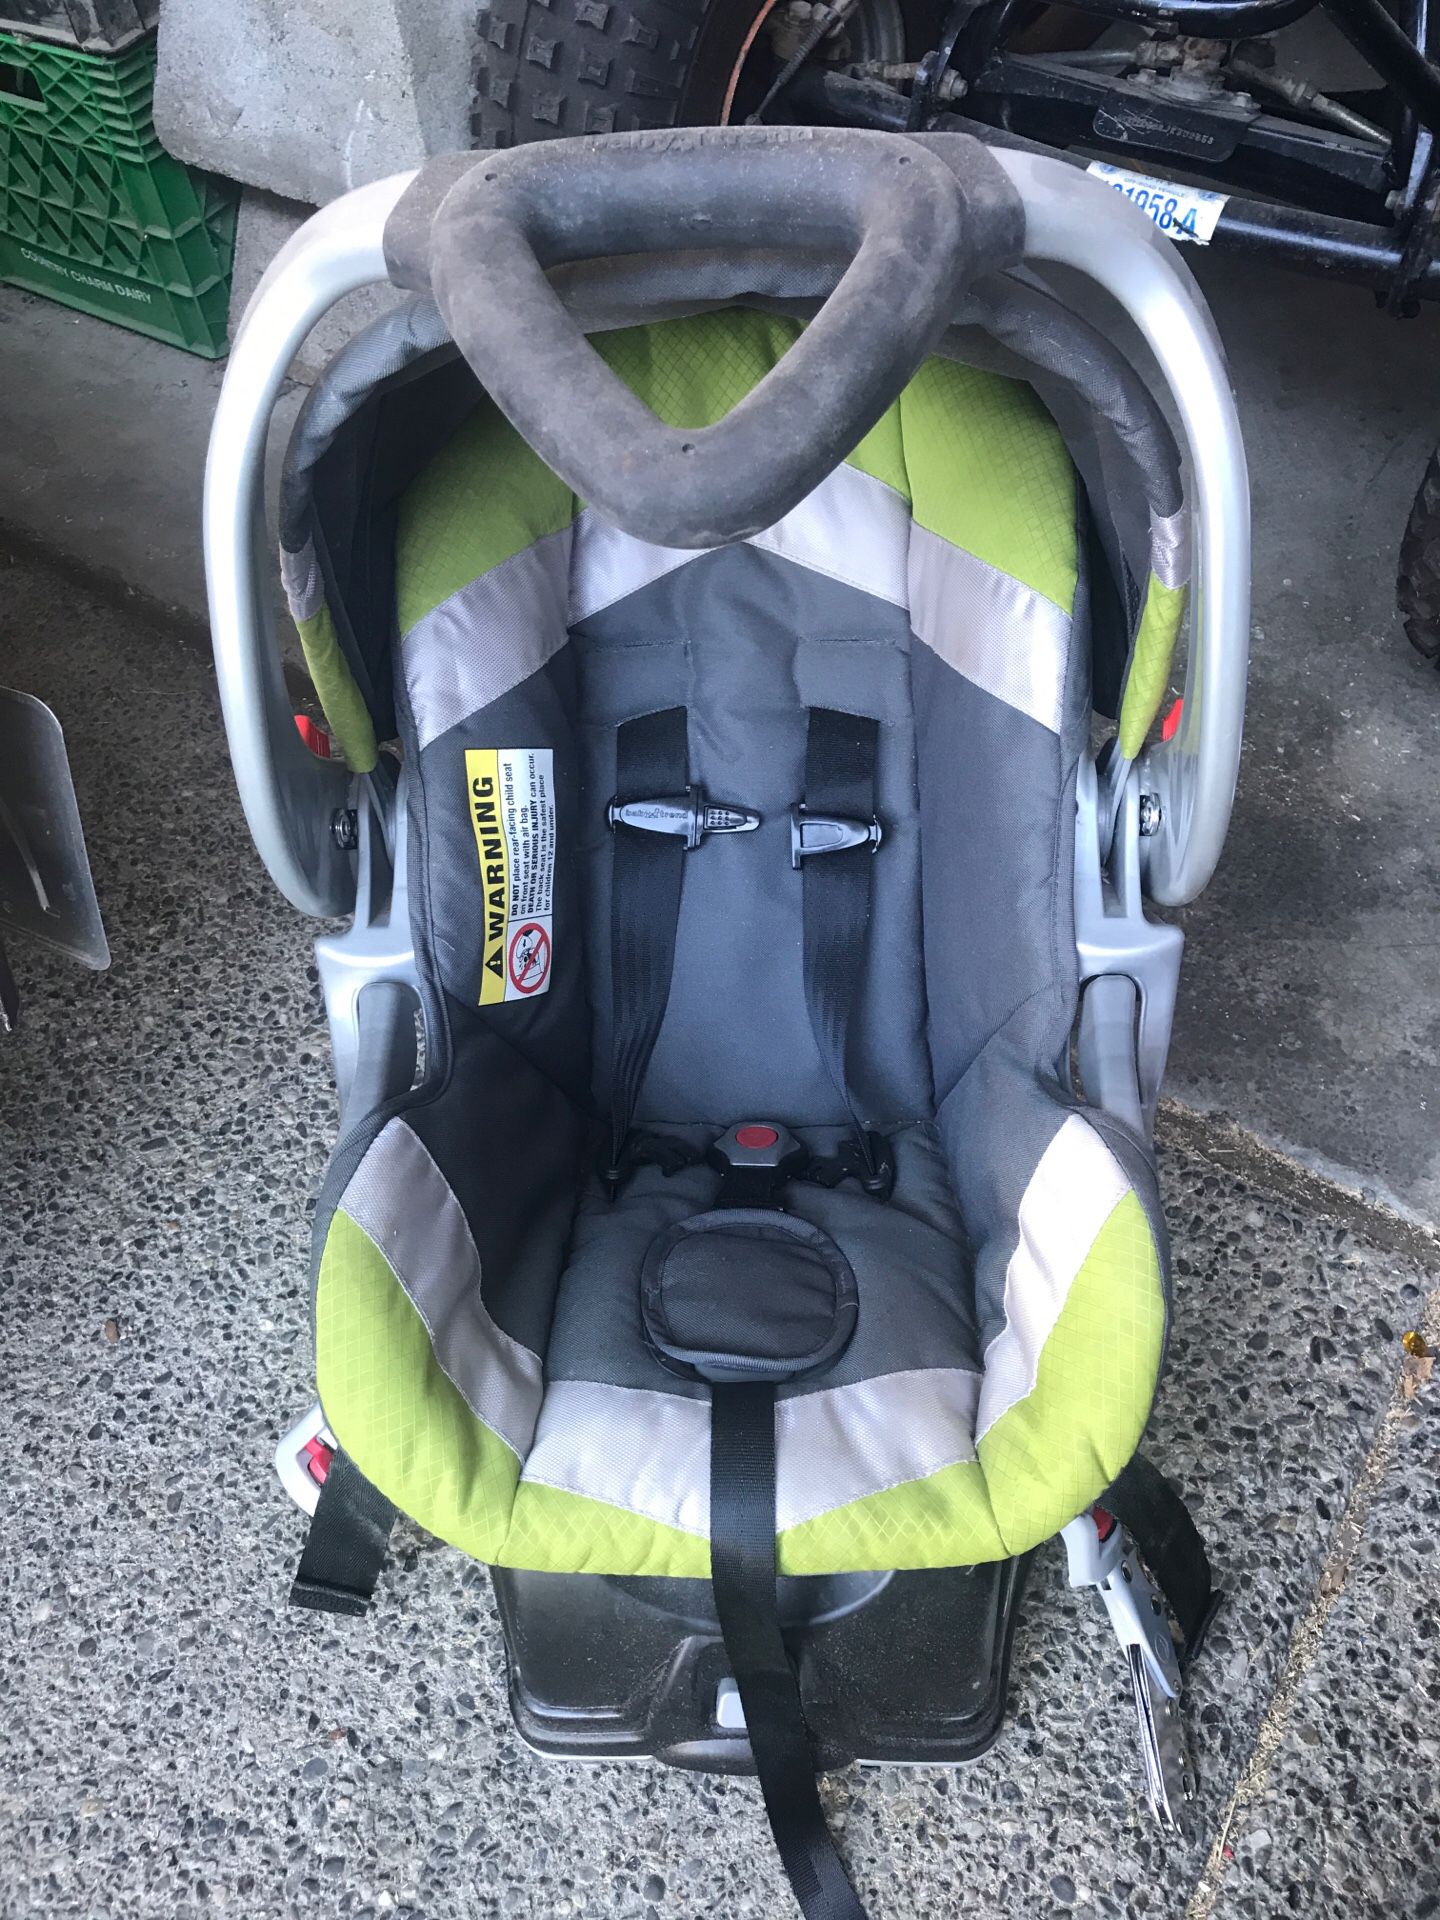 Free baby trend infant car seat